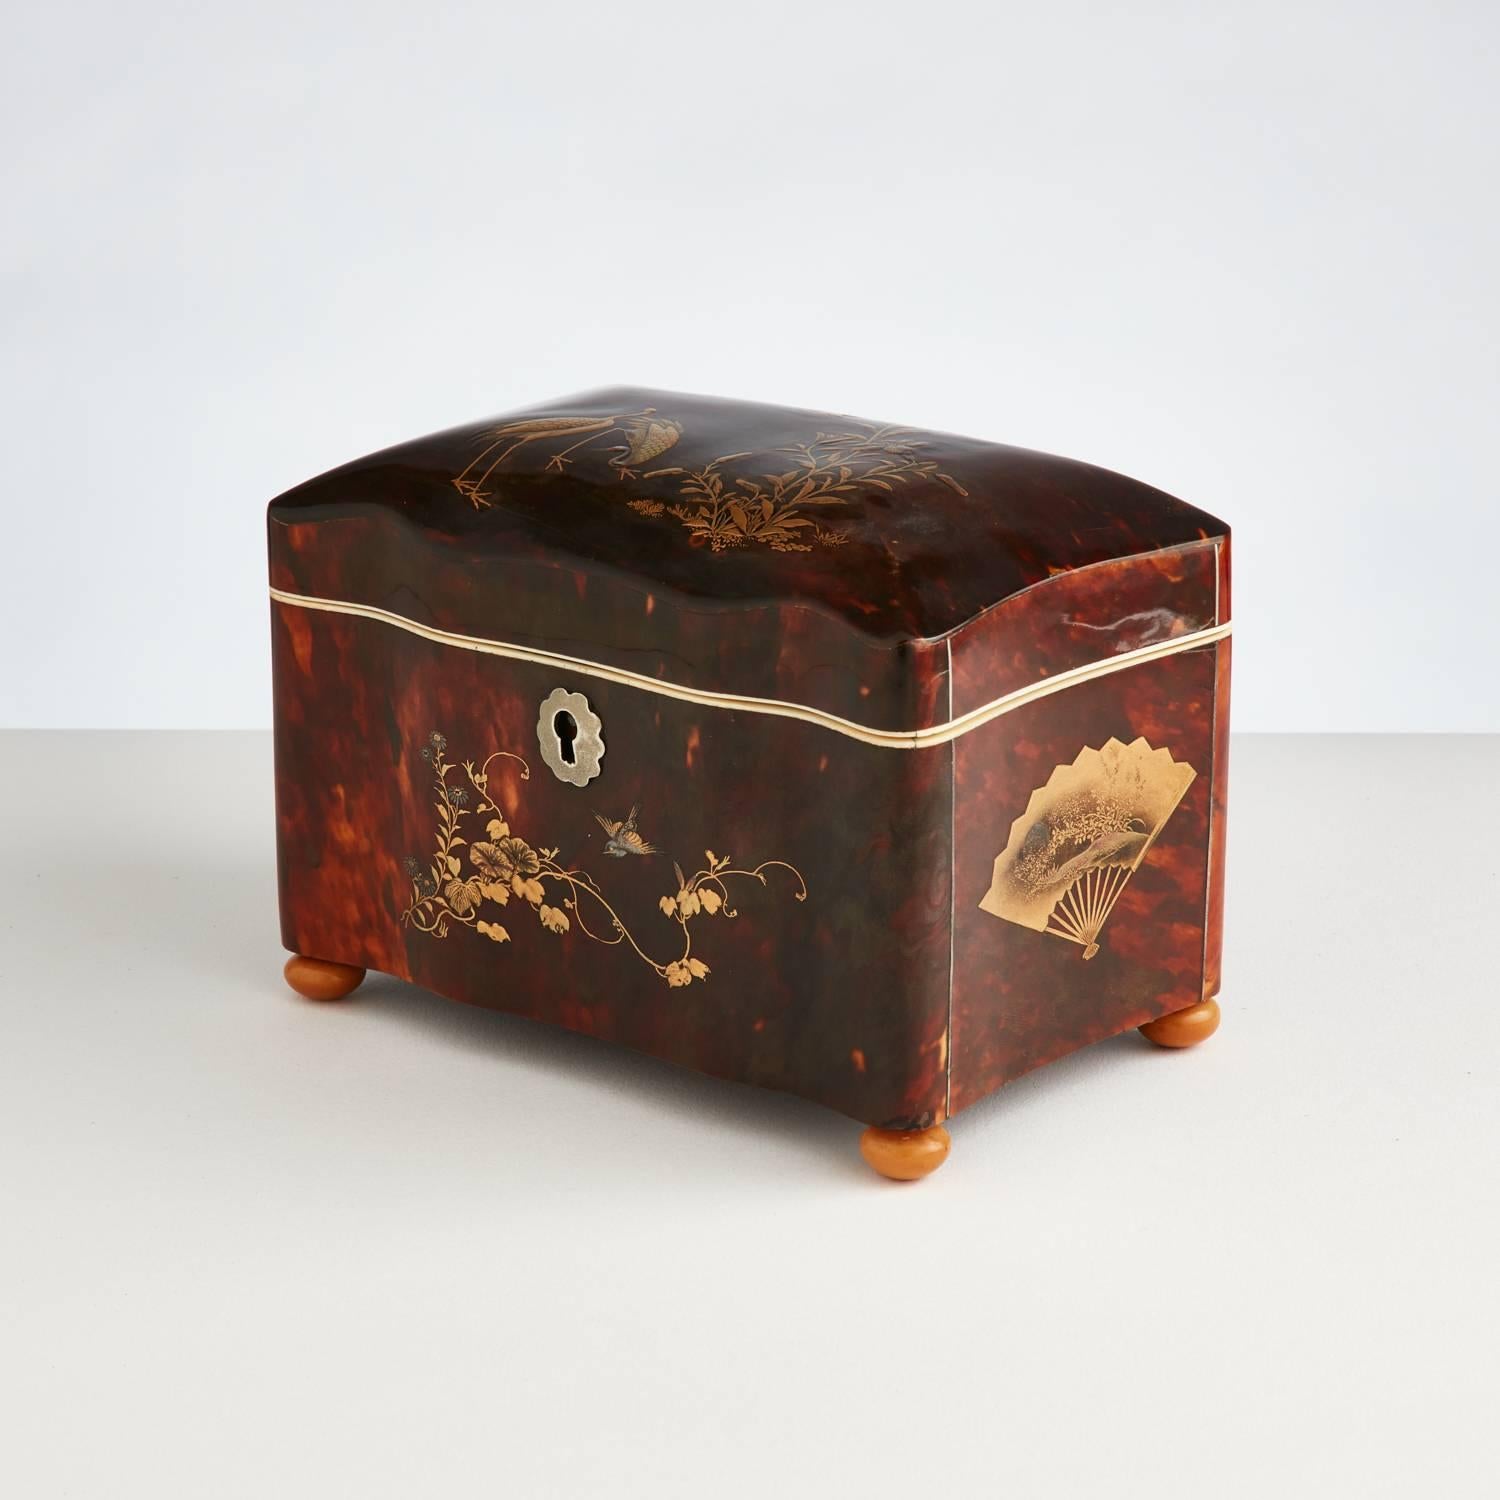 A rare Chinese export tortoiseshell tea caddy made for the Dutch market.
The exterior has decorative lacquer panels on every surface. 
The top and front depict cranes and foliage while the side panels have decorative fans.
The shaped body and